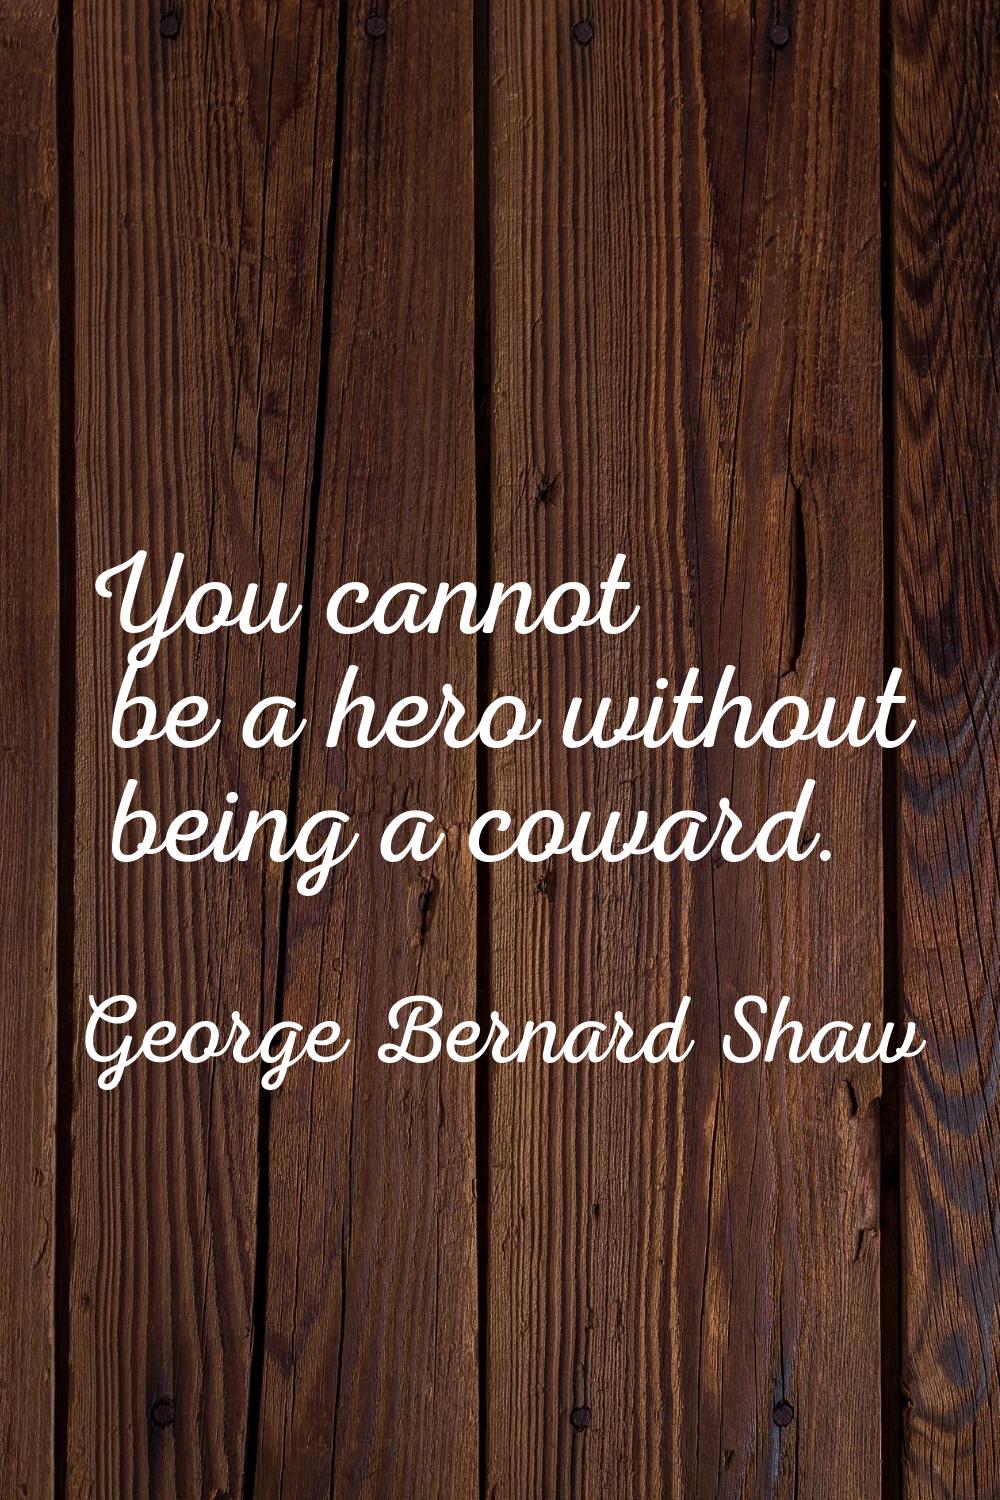 You cannot be a hero without being a coward.